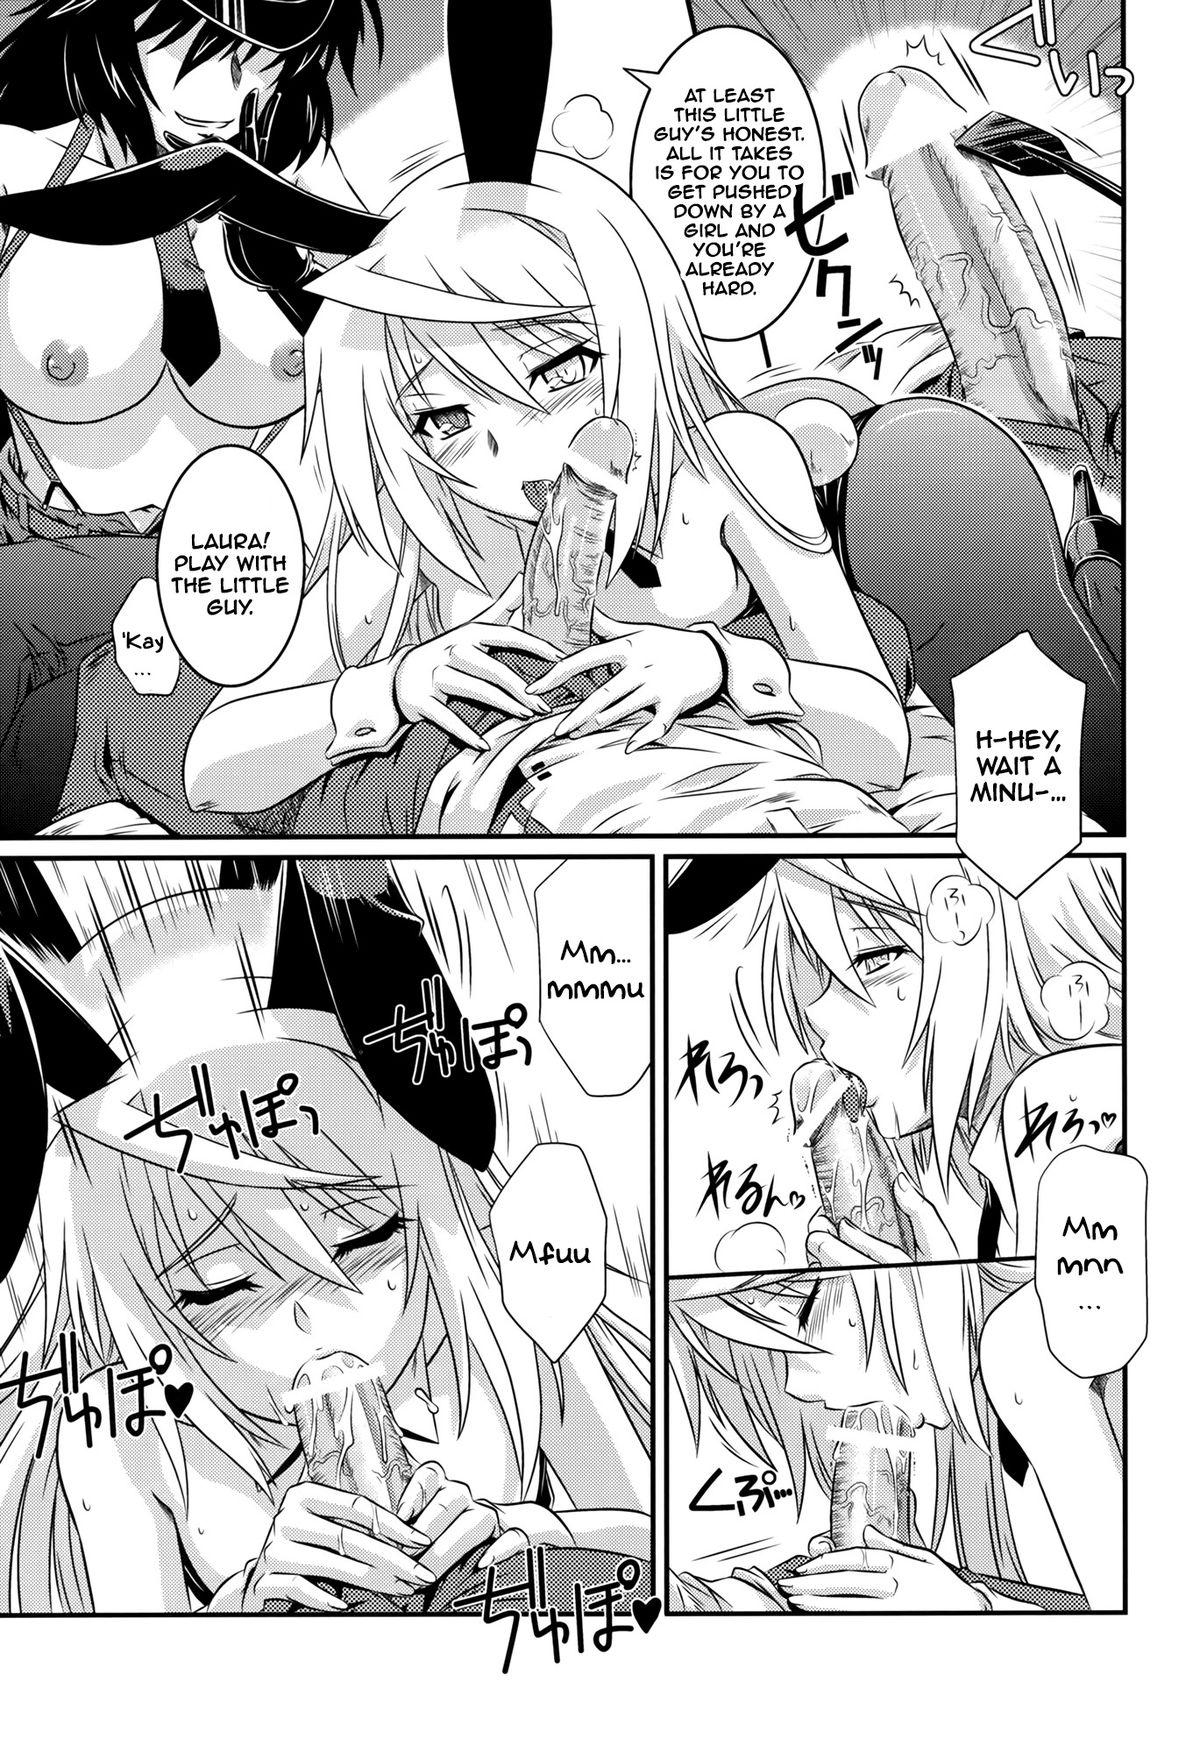 Hot Women Having Sex is Incest Strategy 4 - Infinite stratos Chastity - Page 6